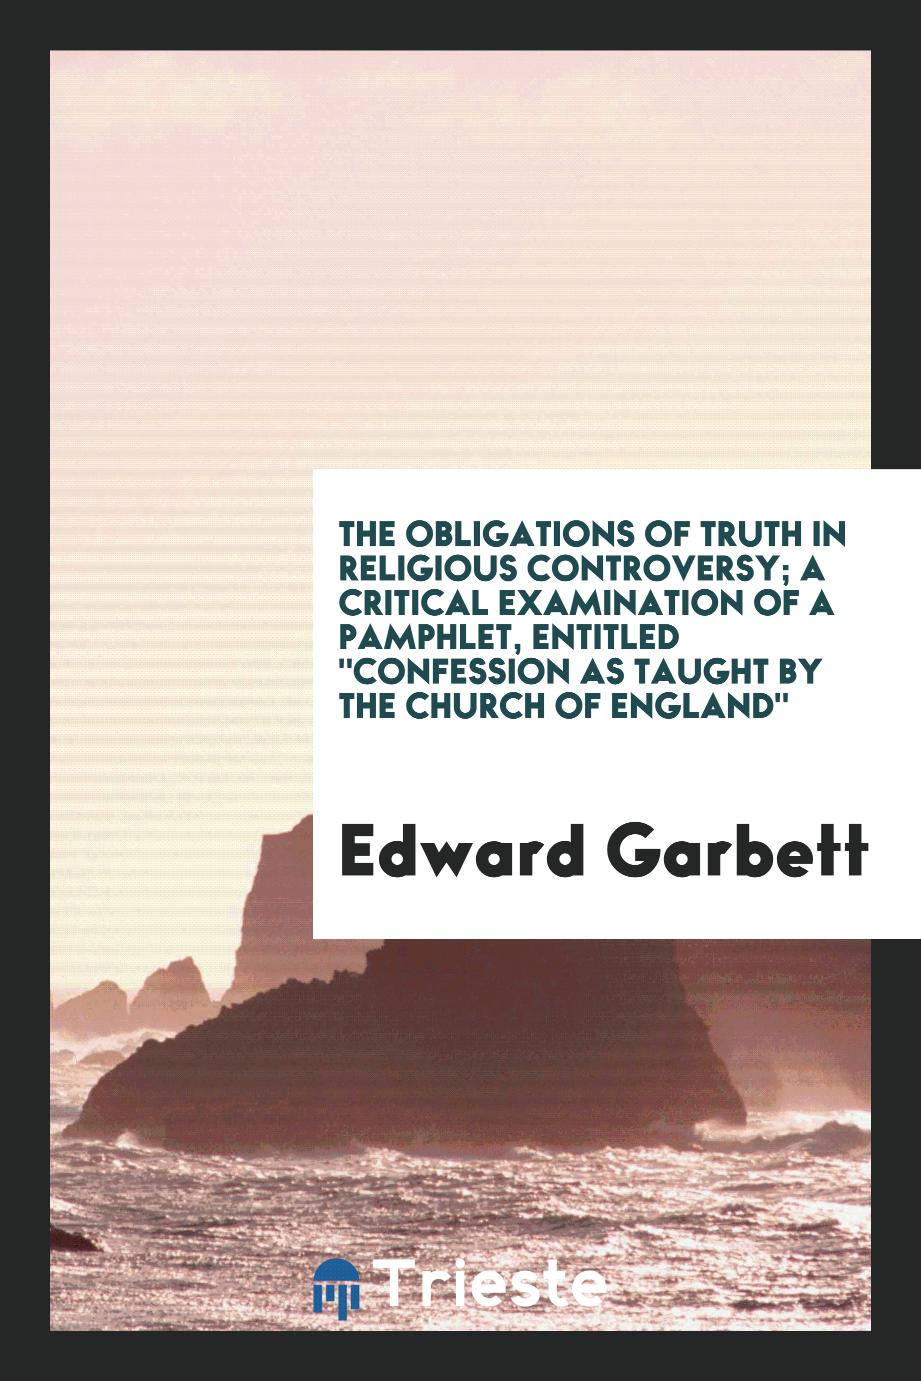 The Obligations of Truth in Religious Controversy; A Critical Examination of a Pamphlet, Entitled "Confession as Taught by the Church of England"